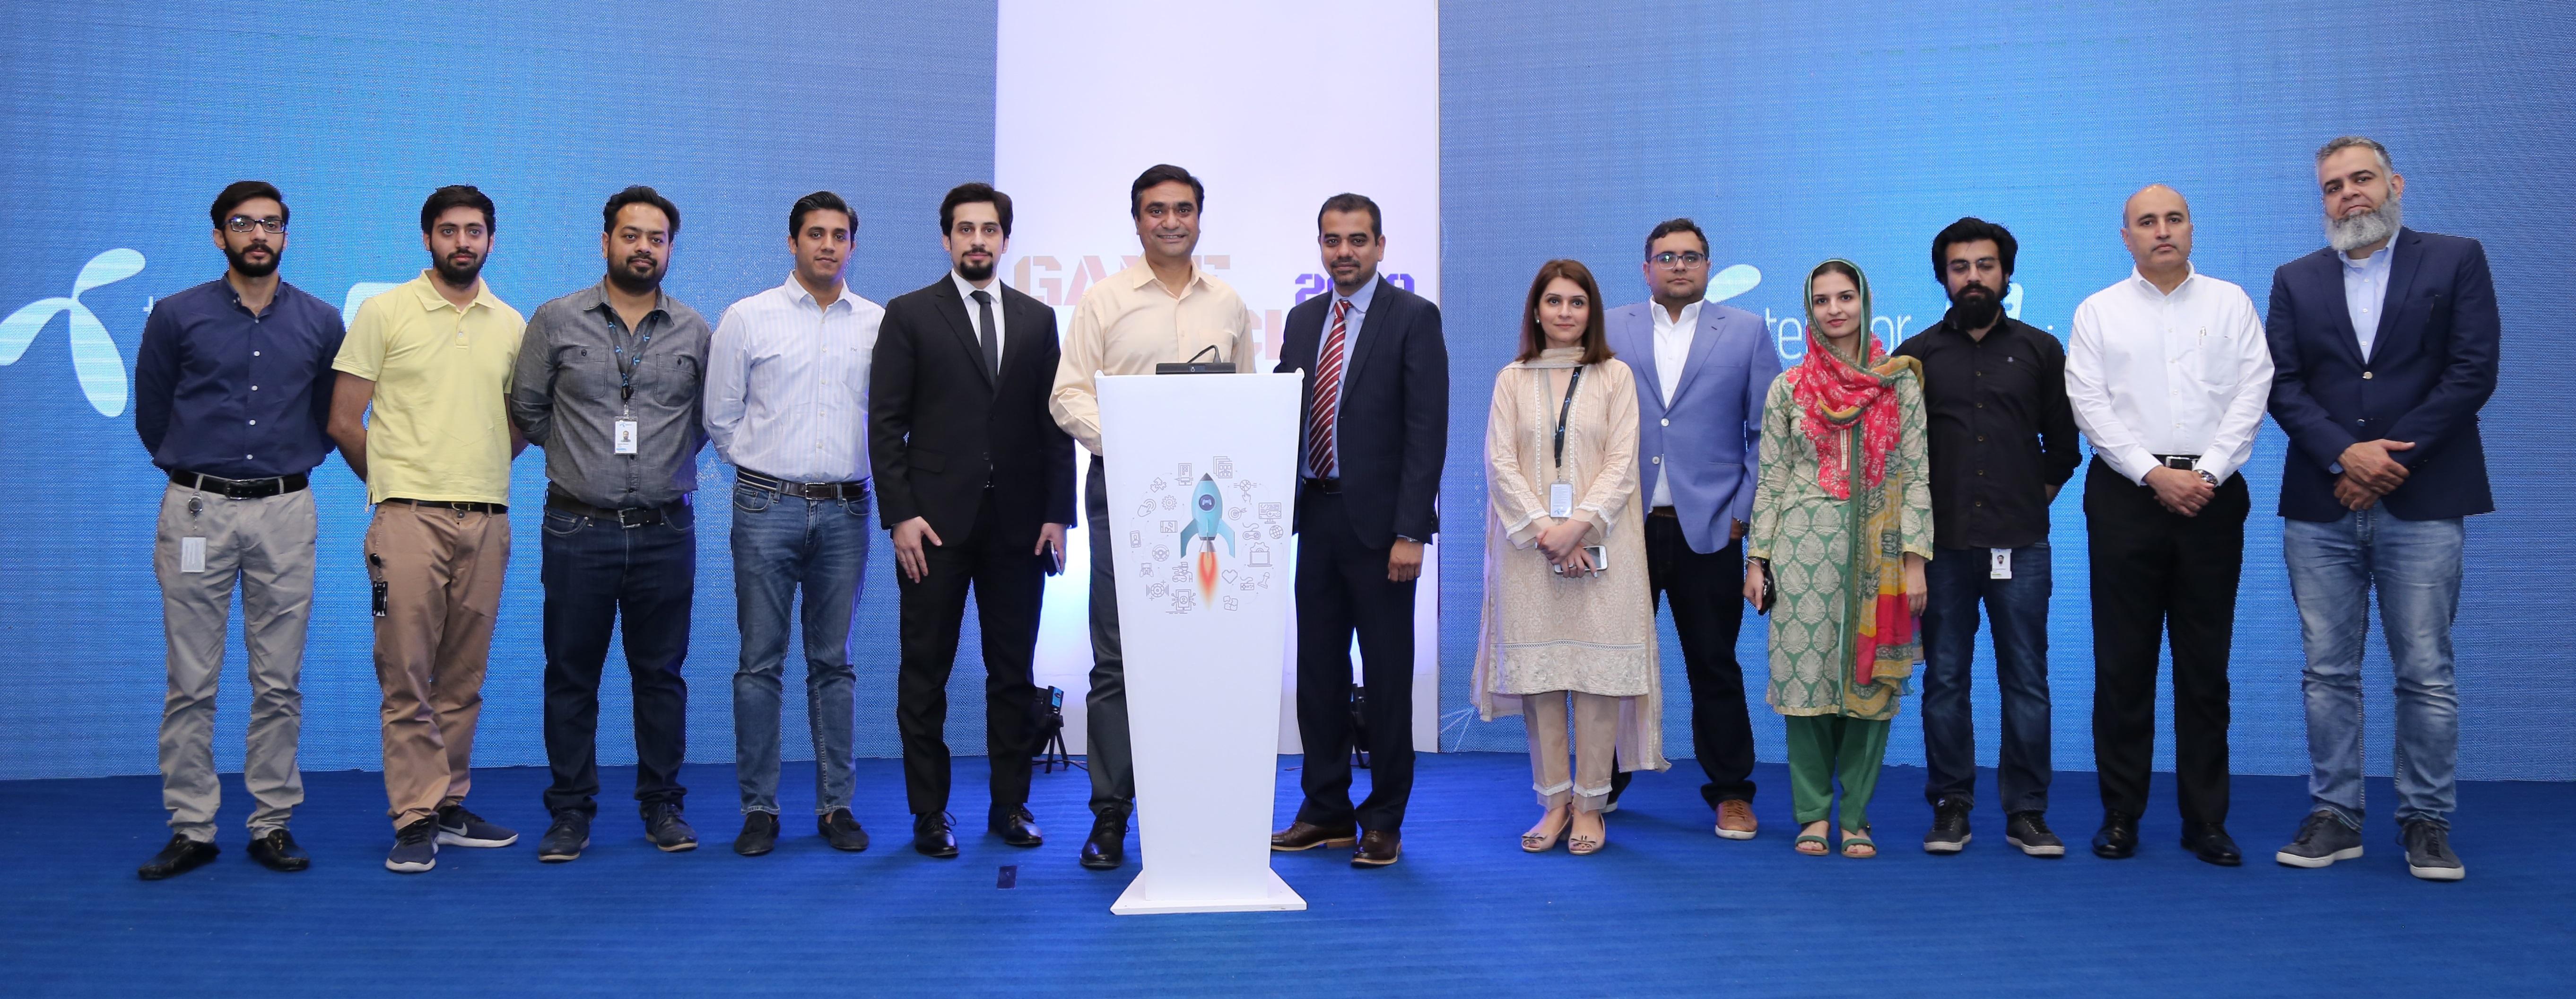 Telenor Velocity together with Google brings its First Gaming Cohort